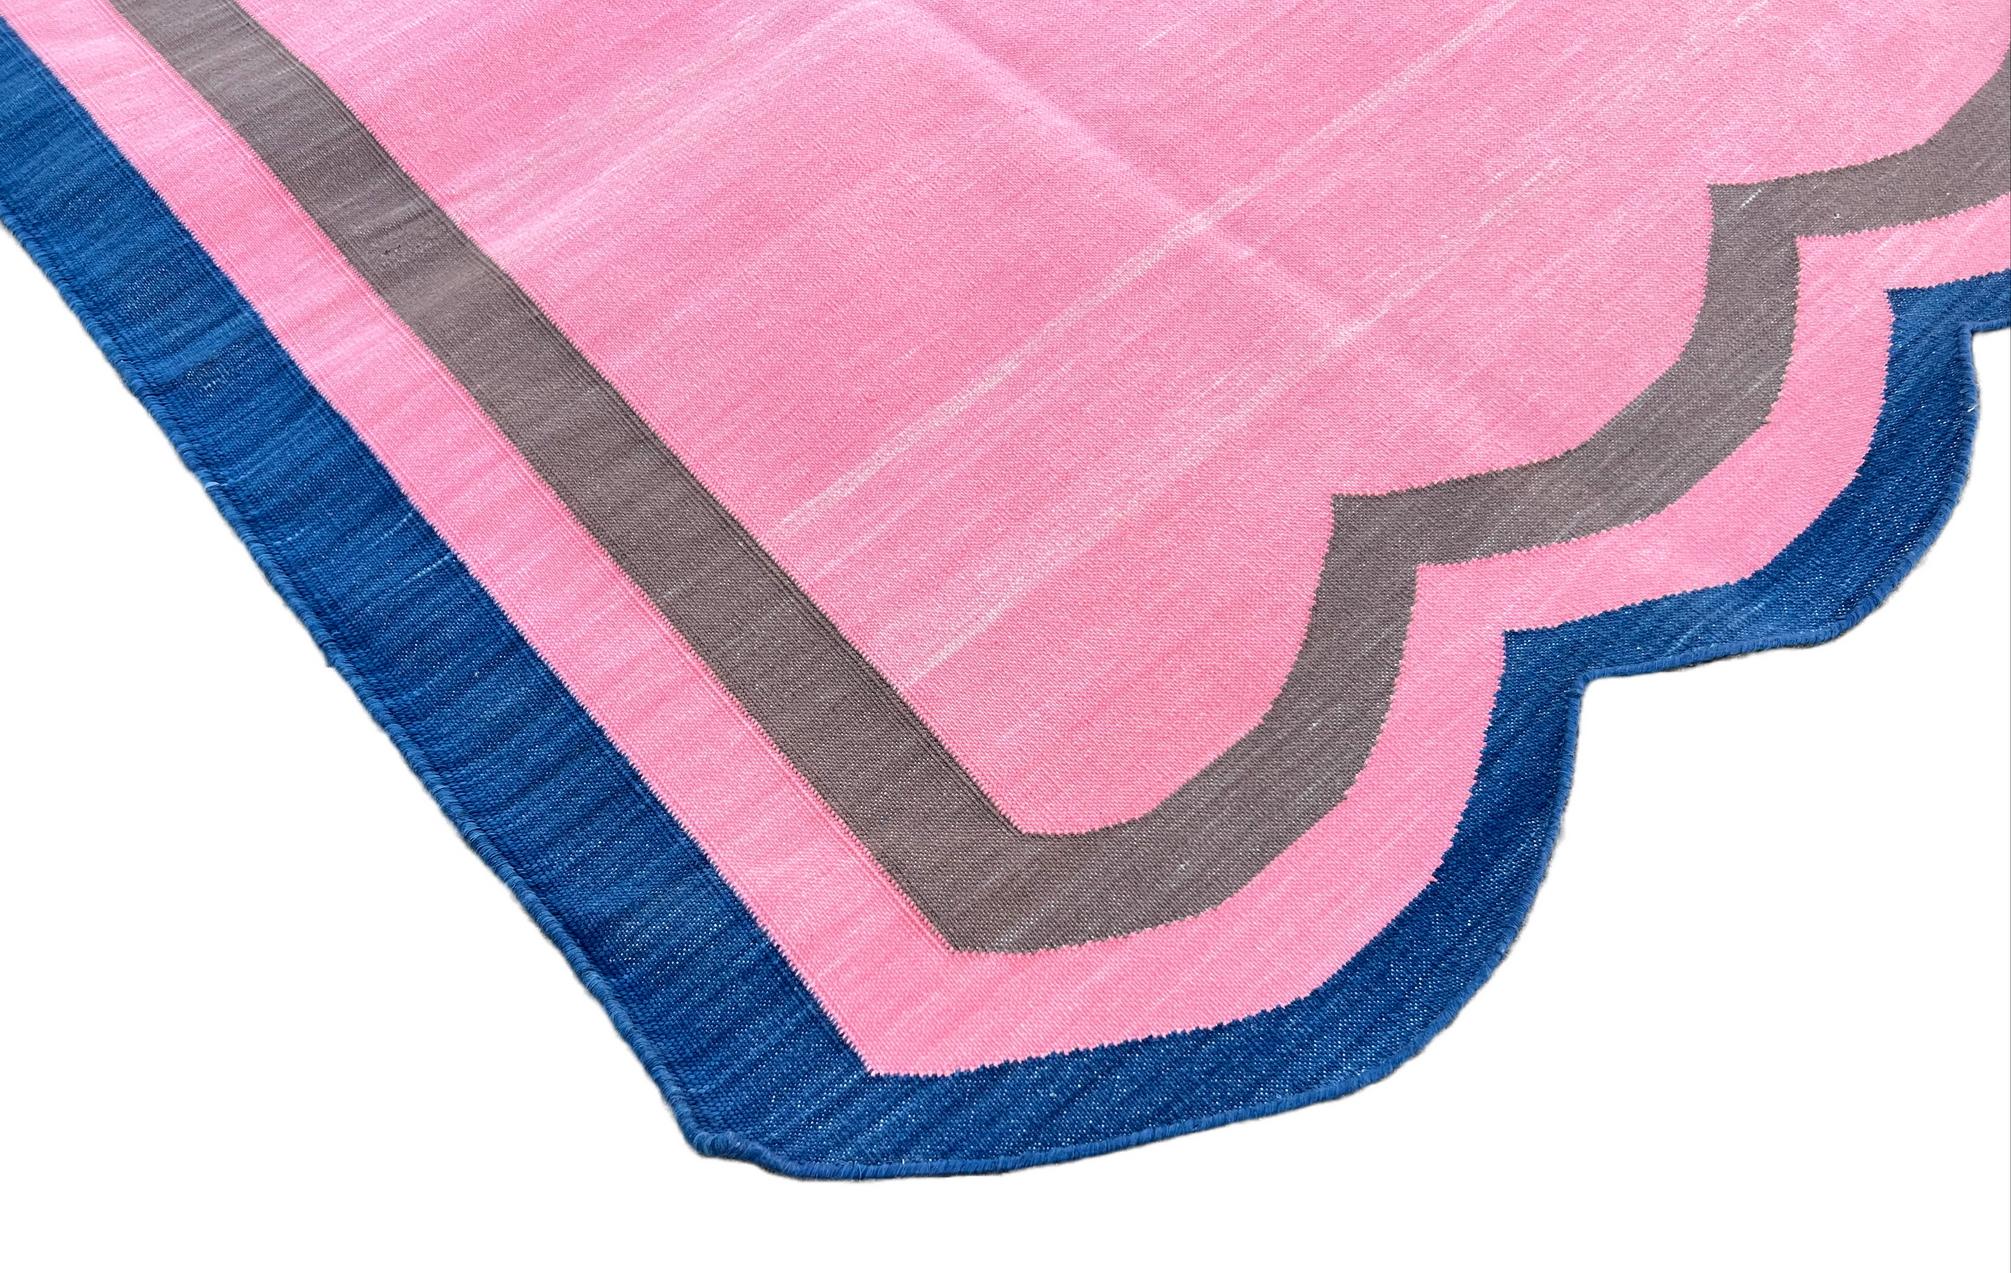 Mid-Century Modern Handmade Cotton Area Flat Weave Rug, 6x8 Pink And Blue Scalloped Striped Dhurrie For Sale